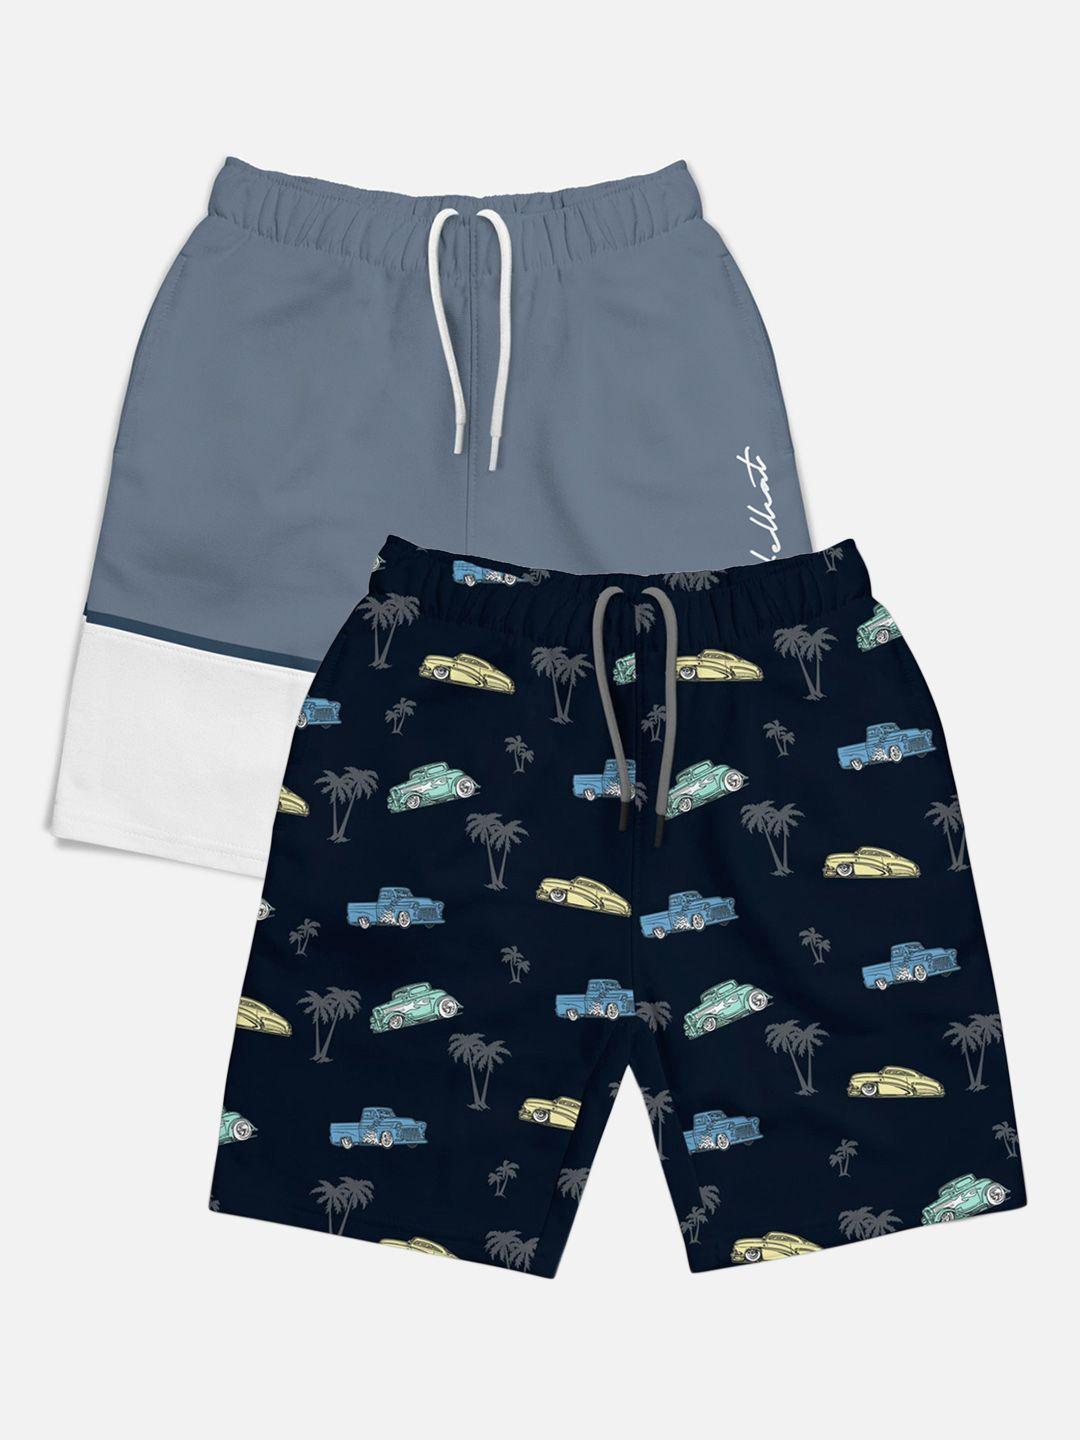 hellcat boys pack of 2 printed mid-rise shorts